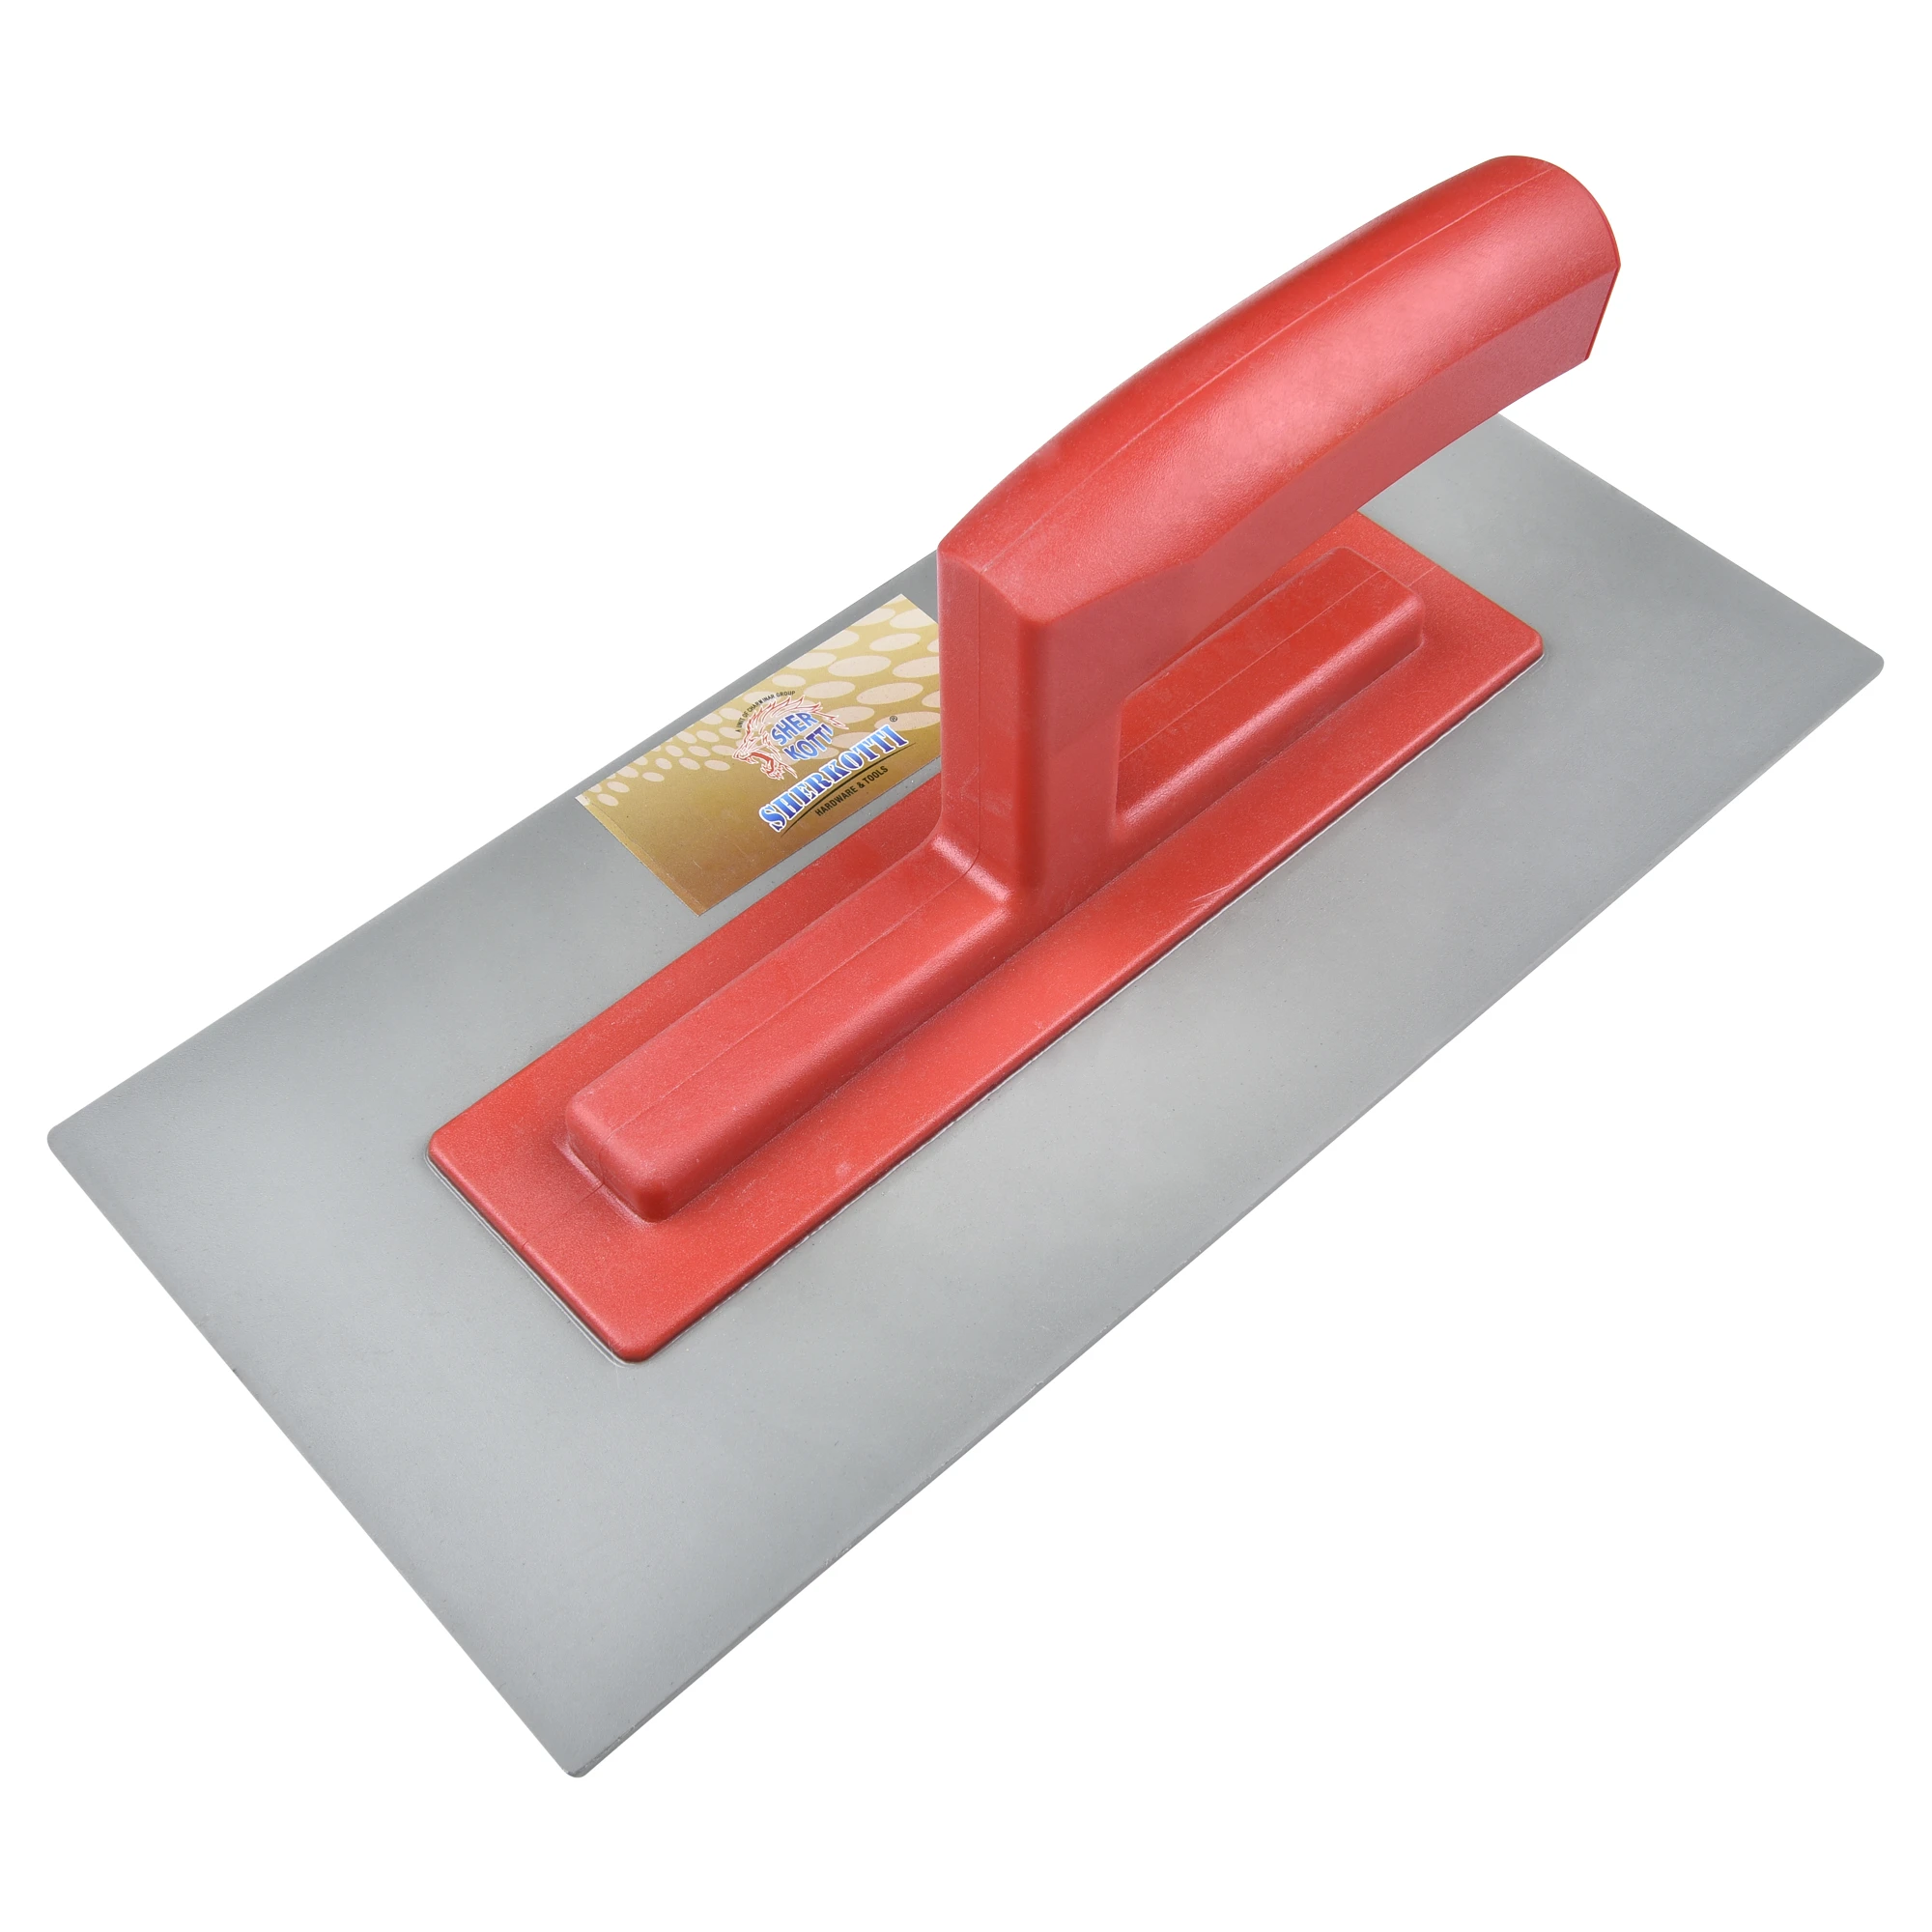 Plastering Trowel/Progrip With Soft Handle Building Construction Tool